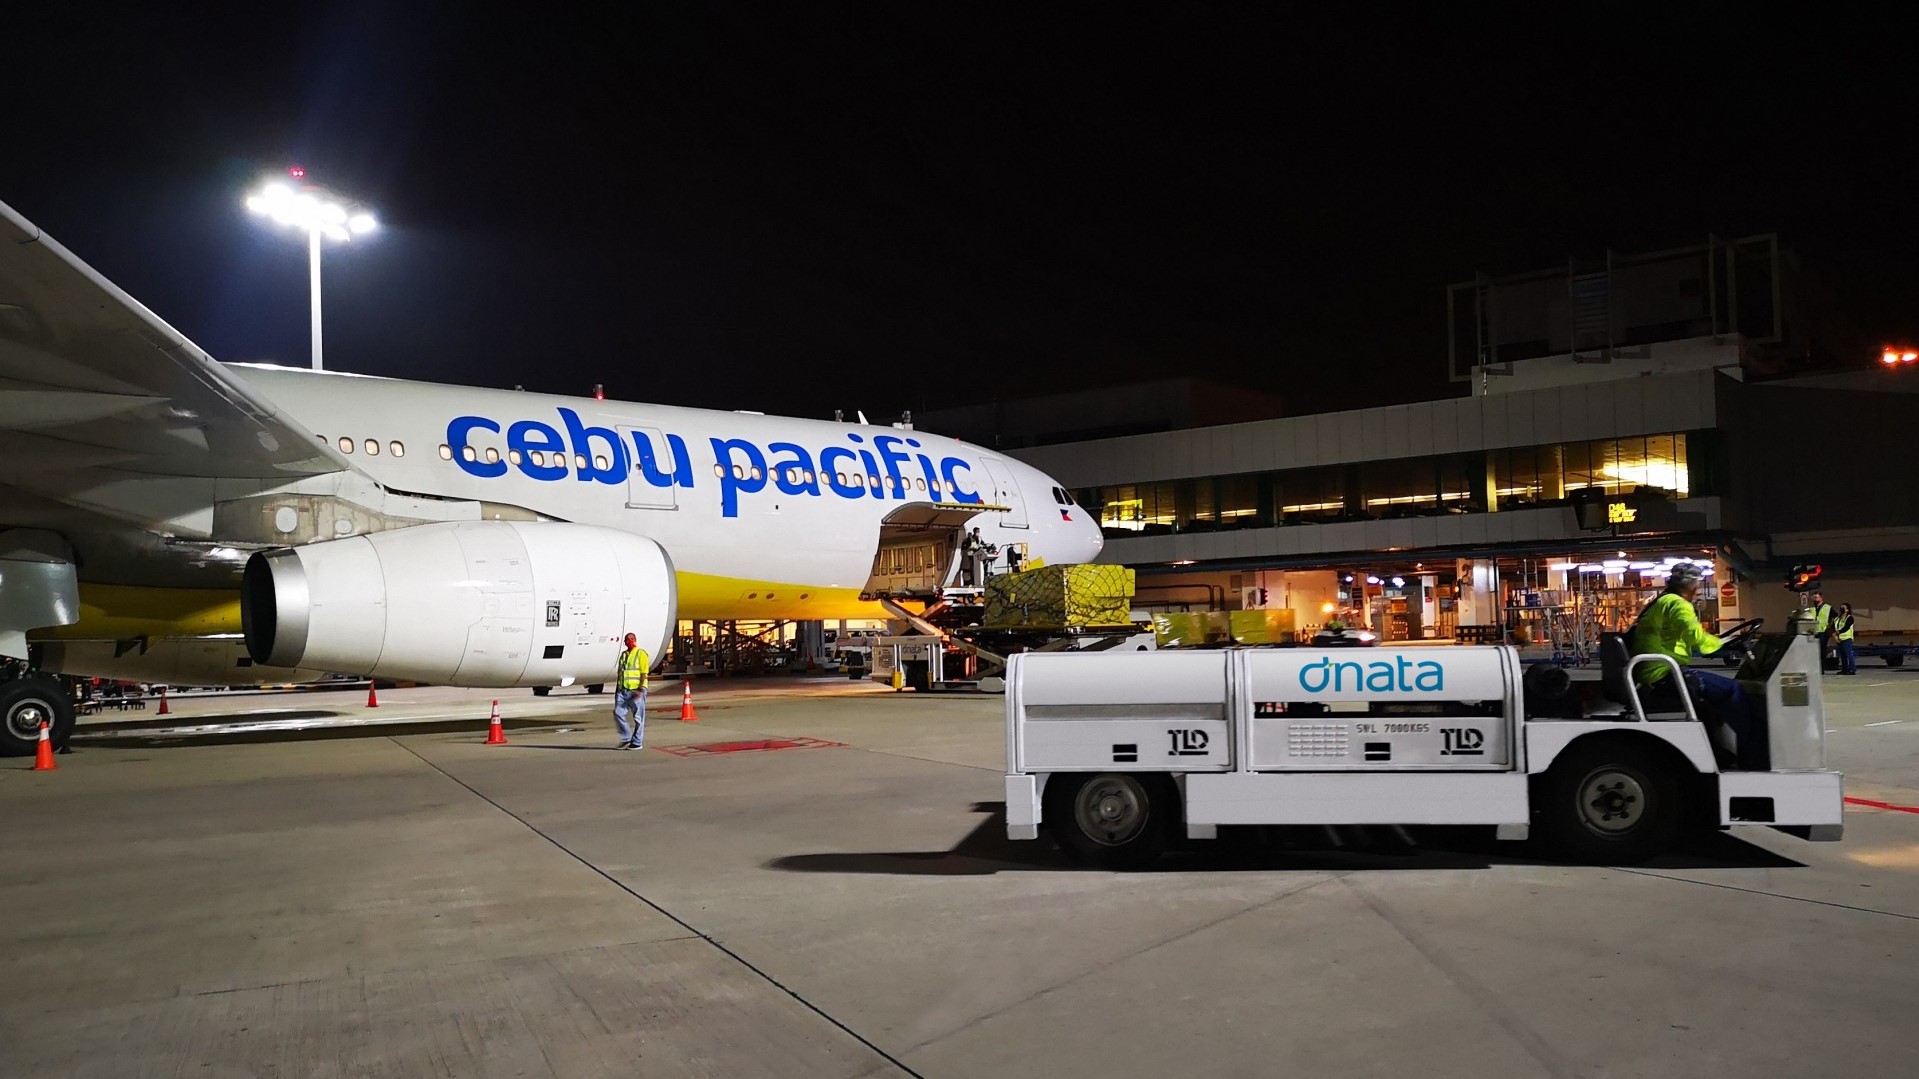 A Cebu Pacific jet being loaded with cargo at night while an airport tug drives by.